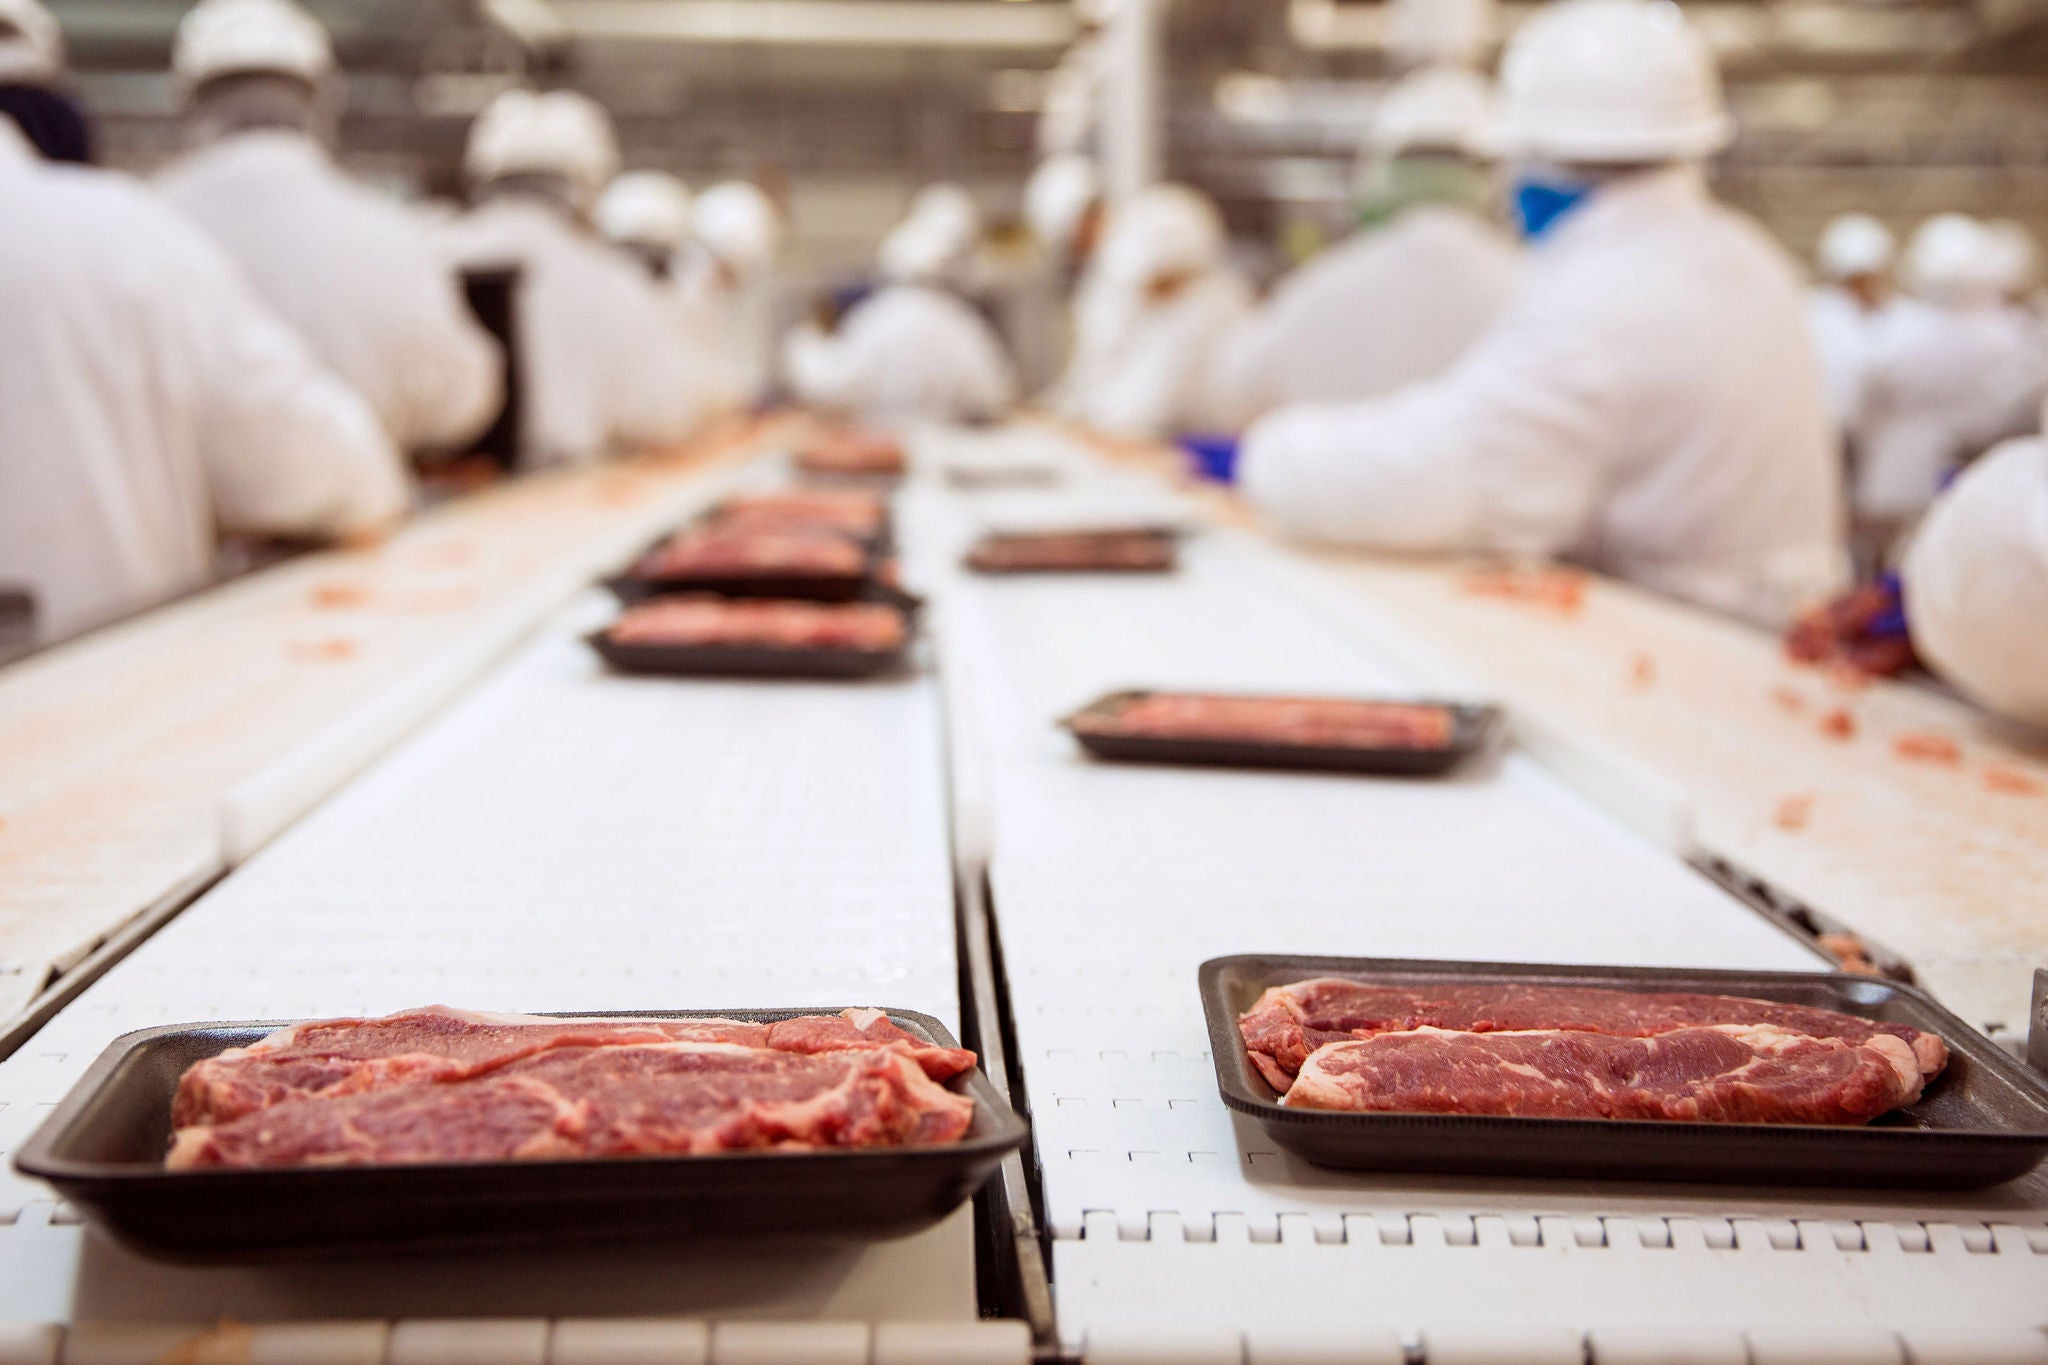 Raw steak beef packaged and shipped with workers